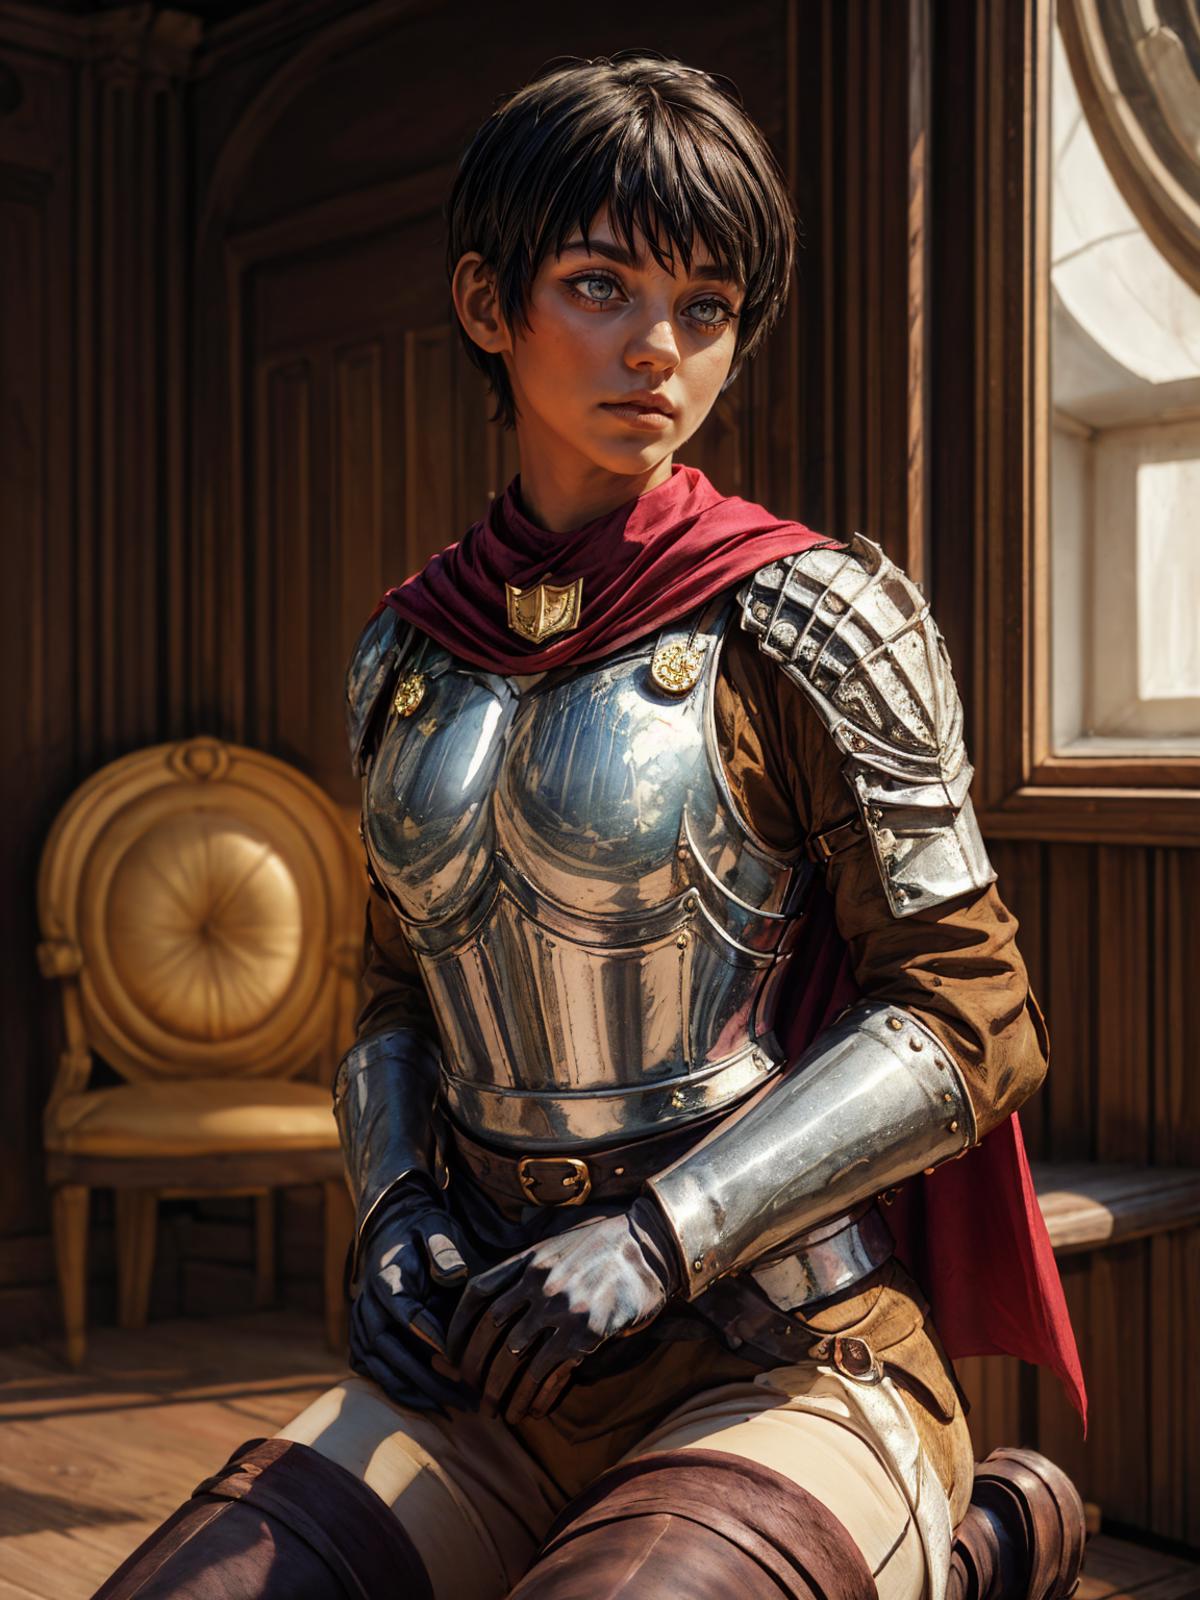 A female warrior in a silver armor and red cape posing in a room.